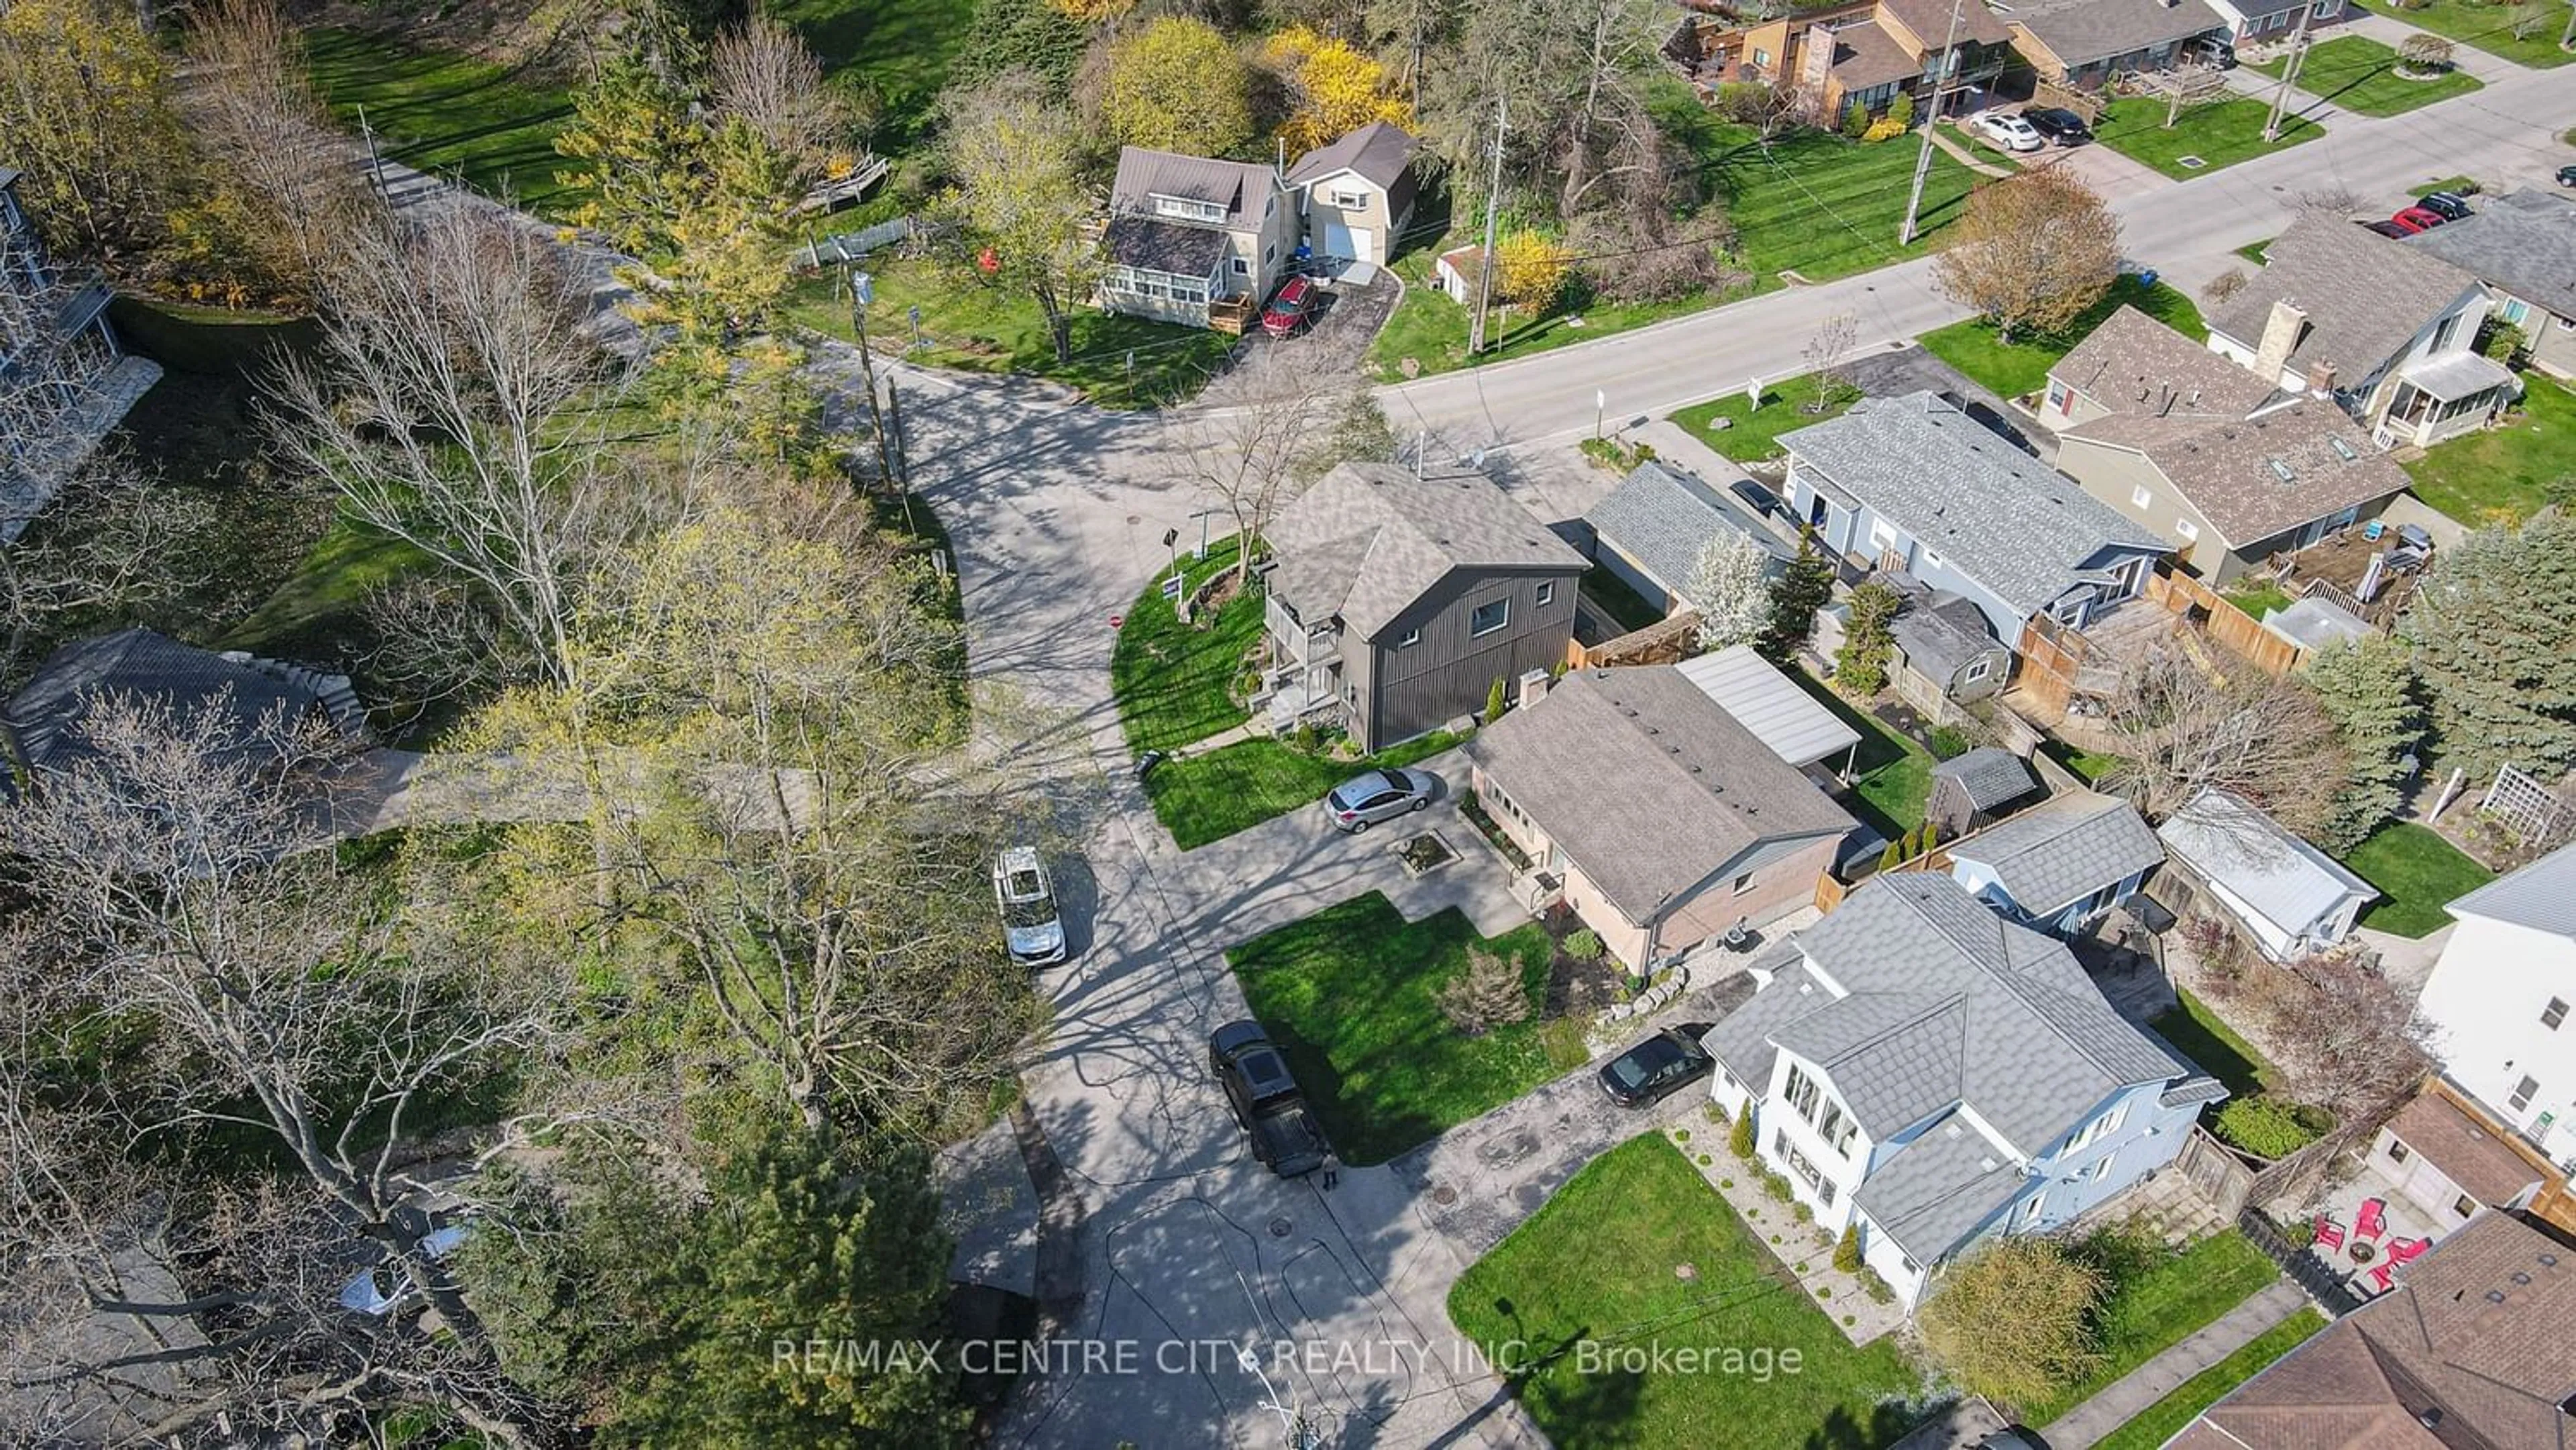 Frontside or backside of a home for 215 Vimy Rdge, Central Elgin Ontario N5L 1A3